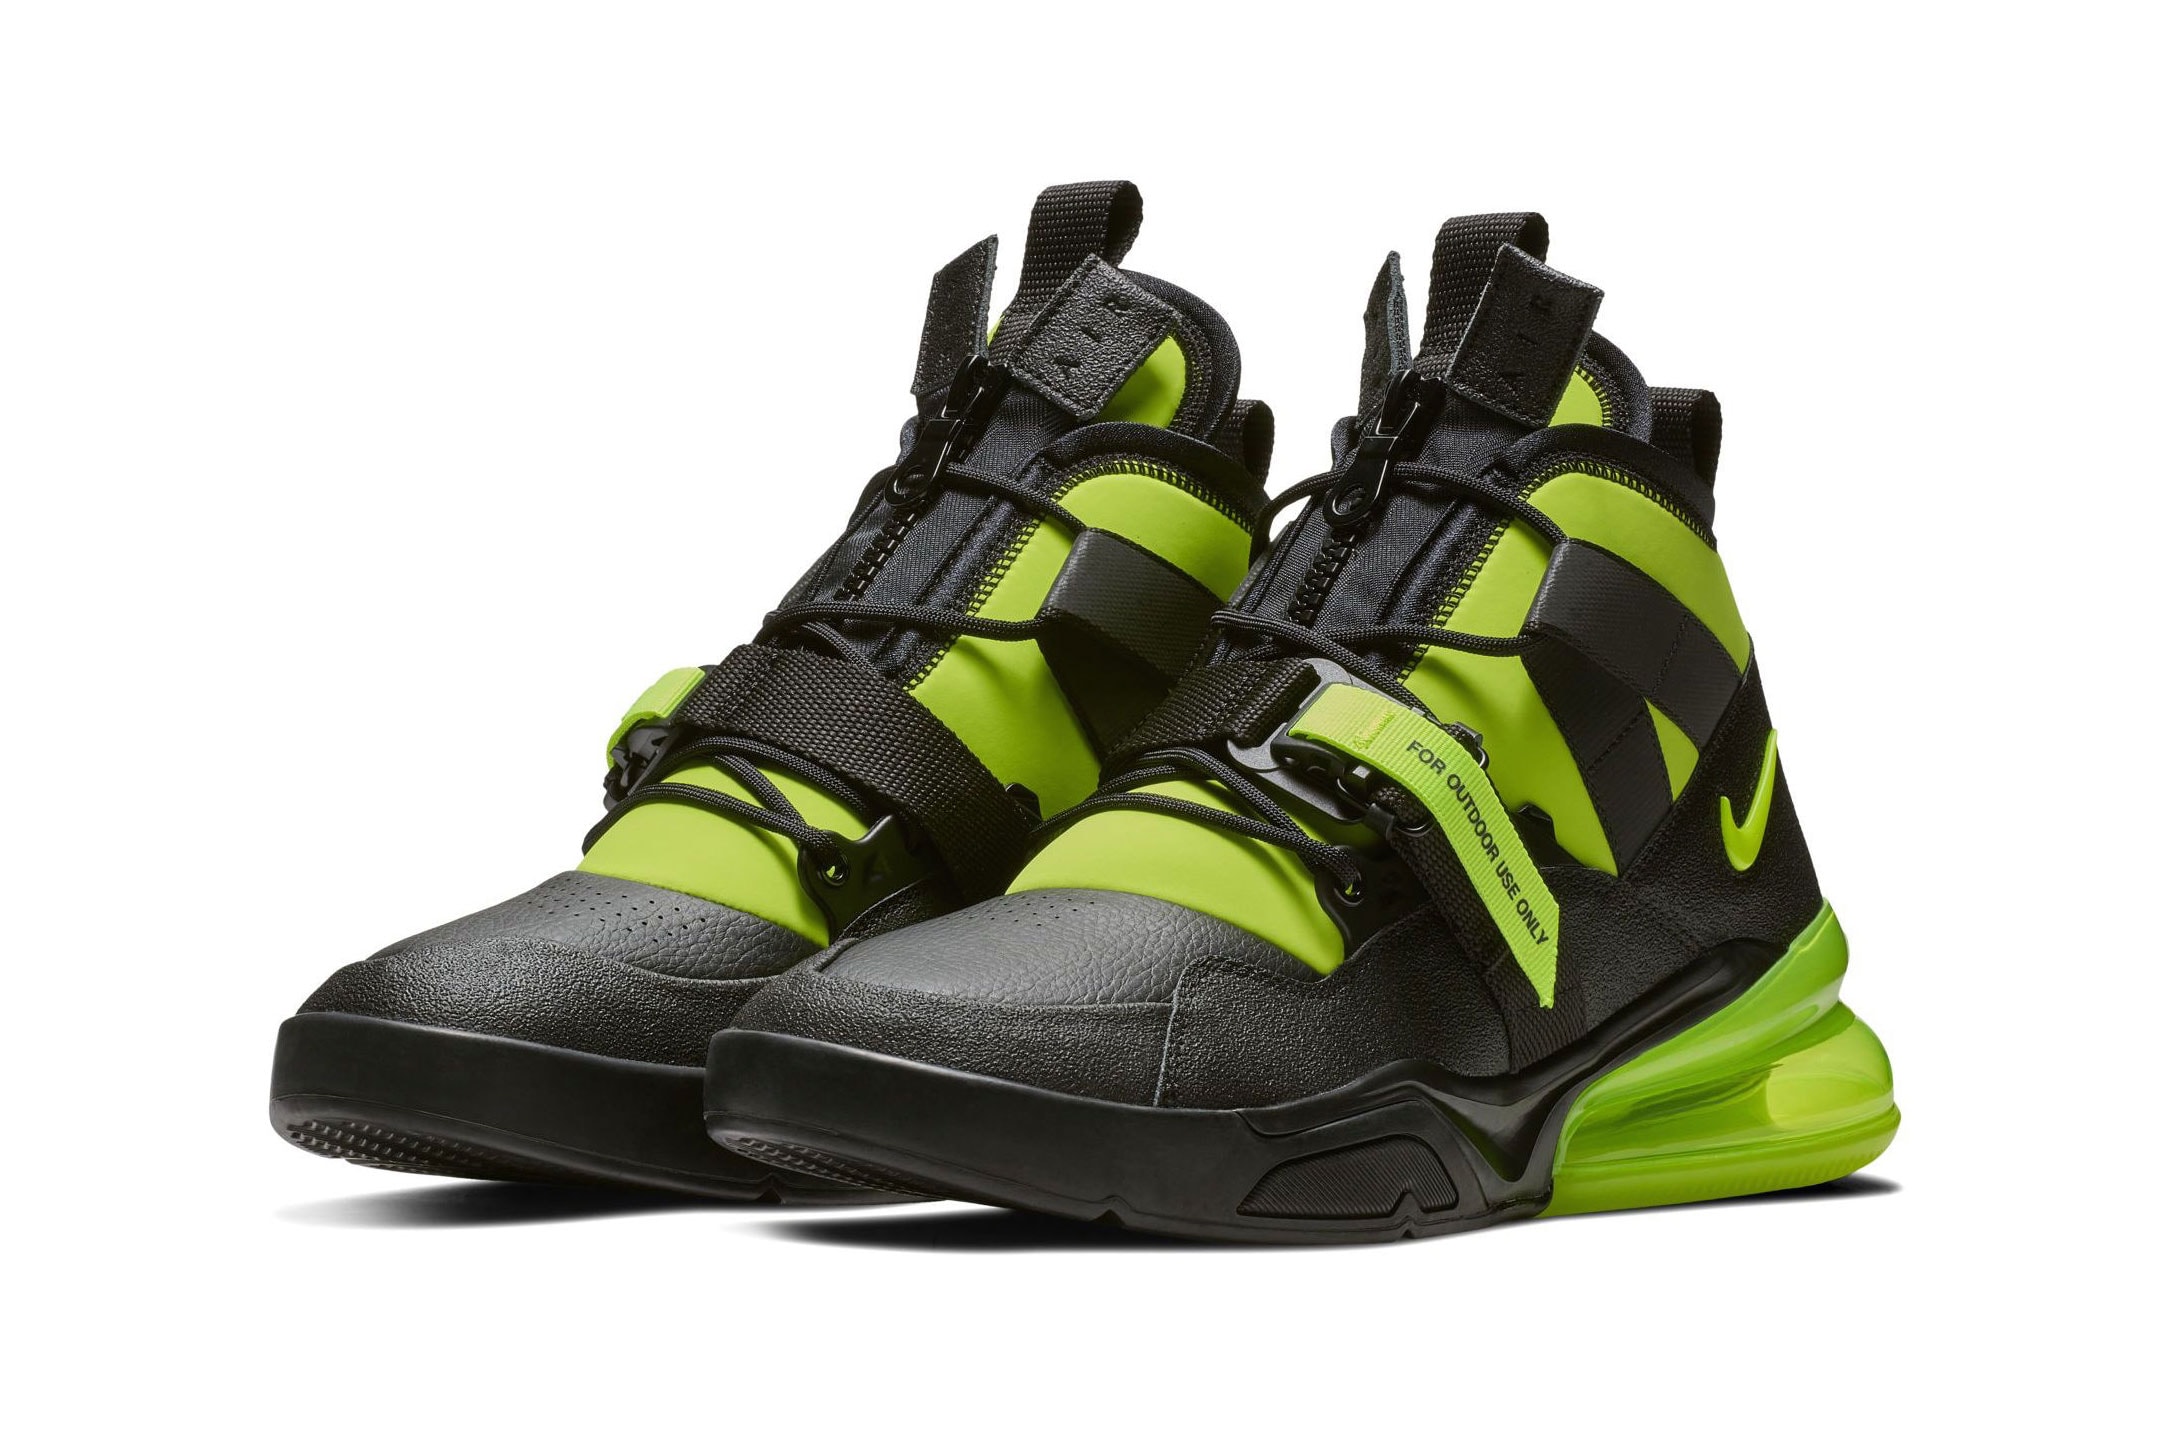  Nike Air Force 270 Utility "Volt" Release Date  leather neoprene neon green